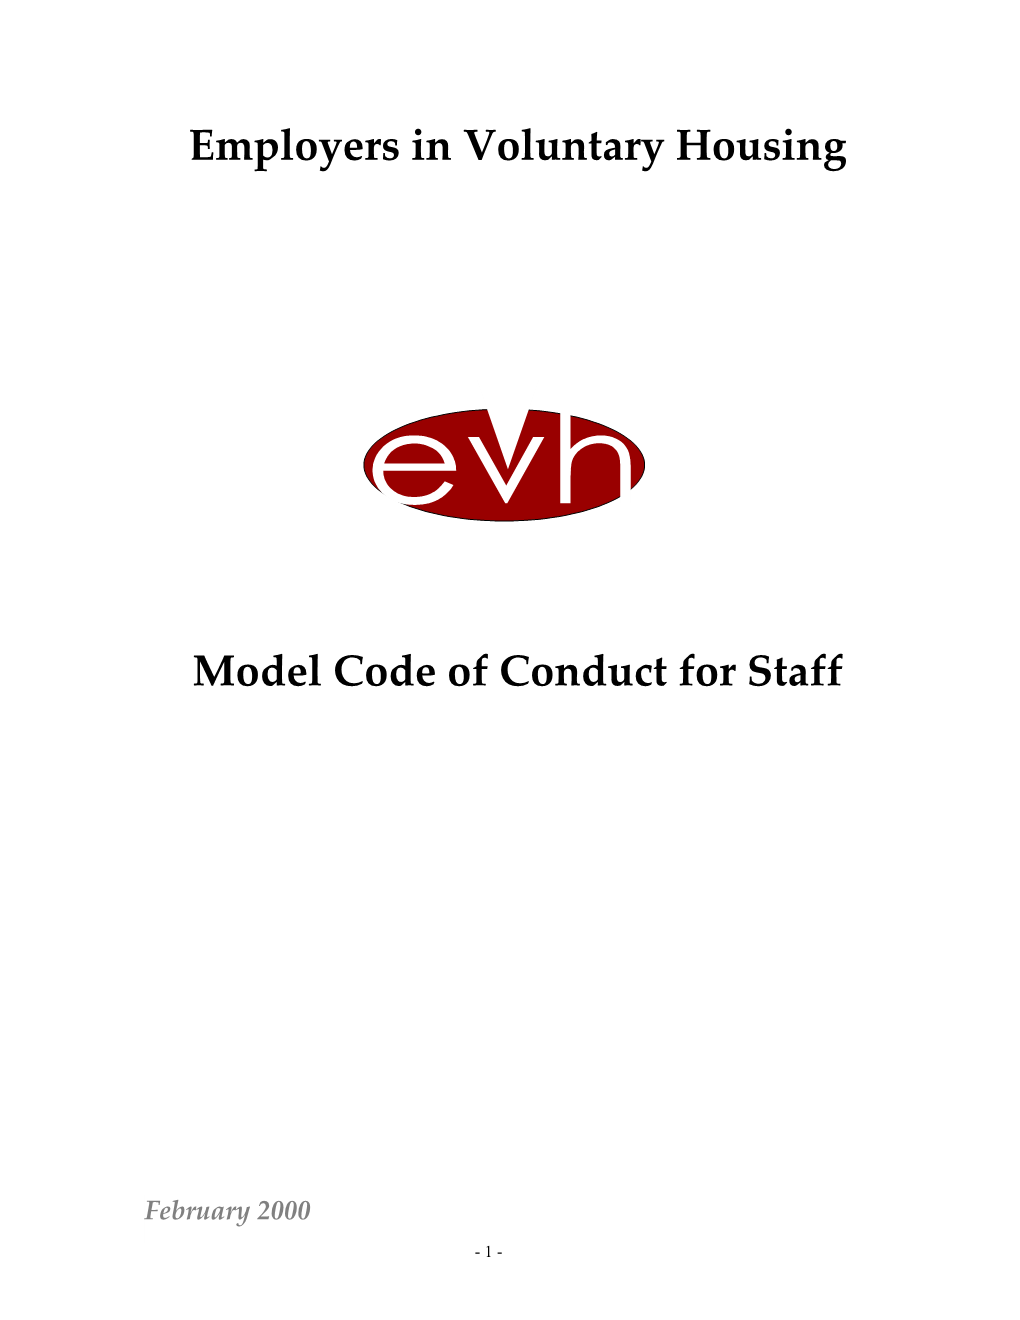 Model Code of Conduct for Staff